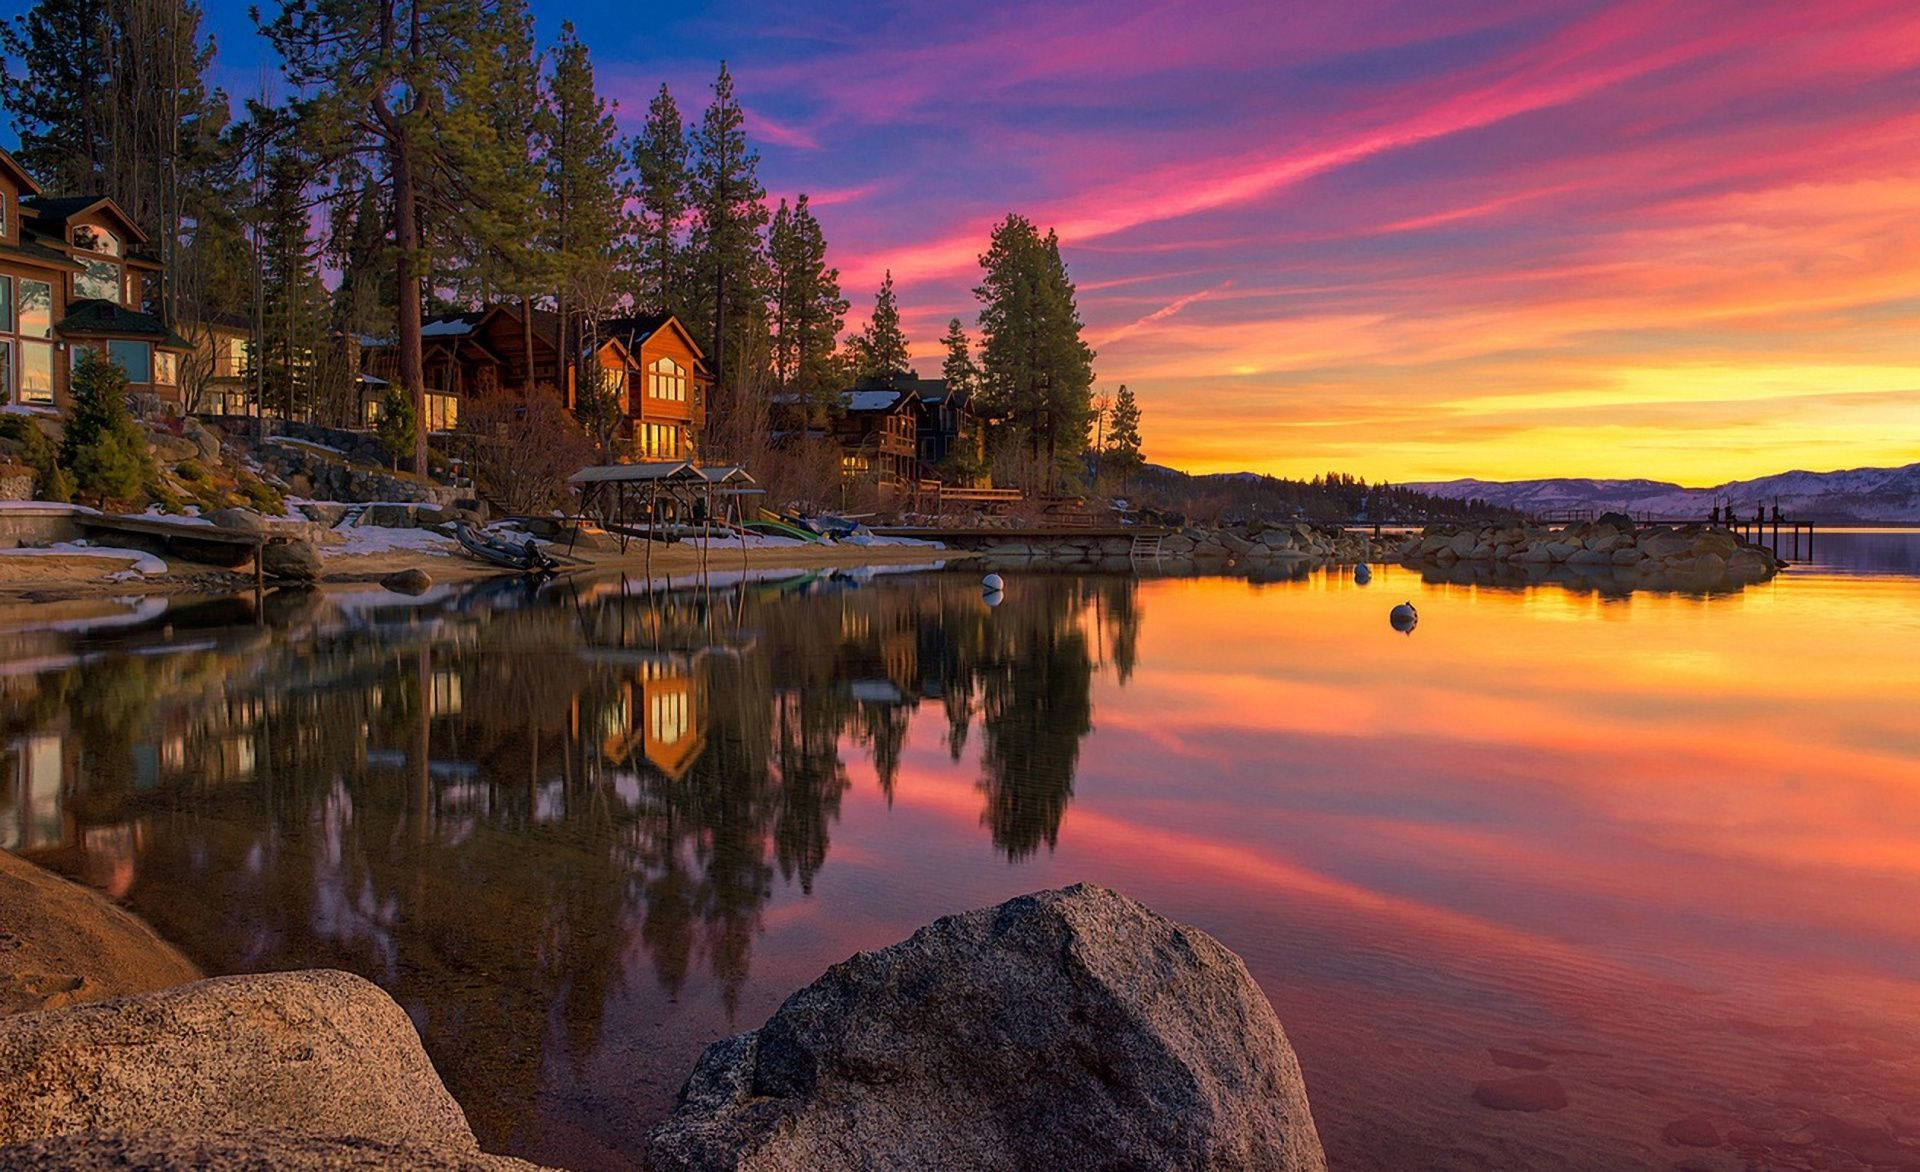 Outdoor Lakeside Cabins Wallpaper